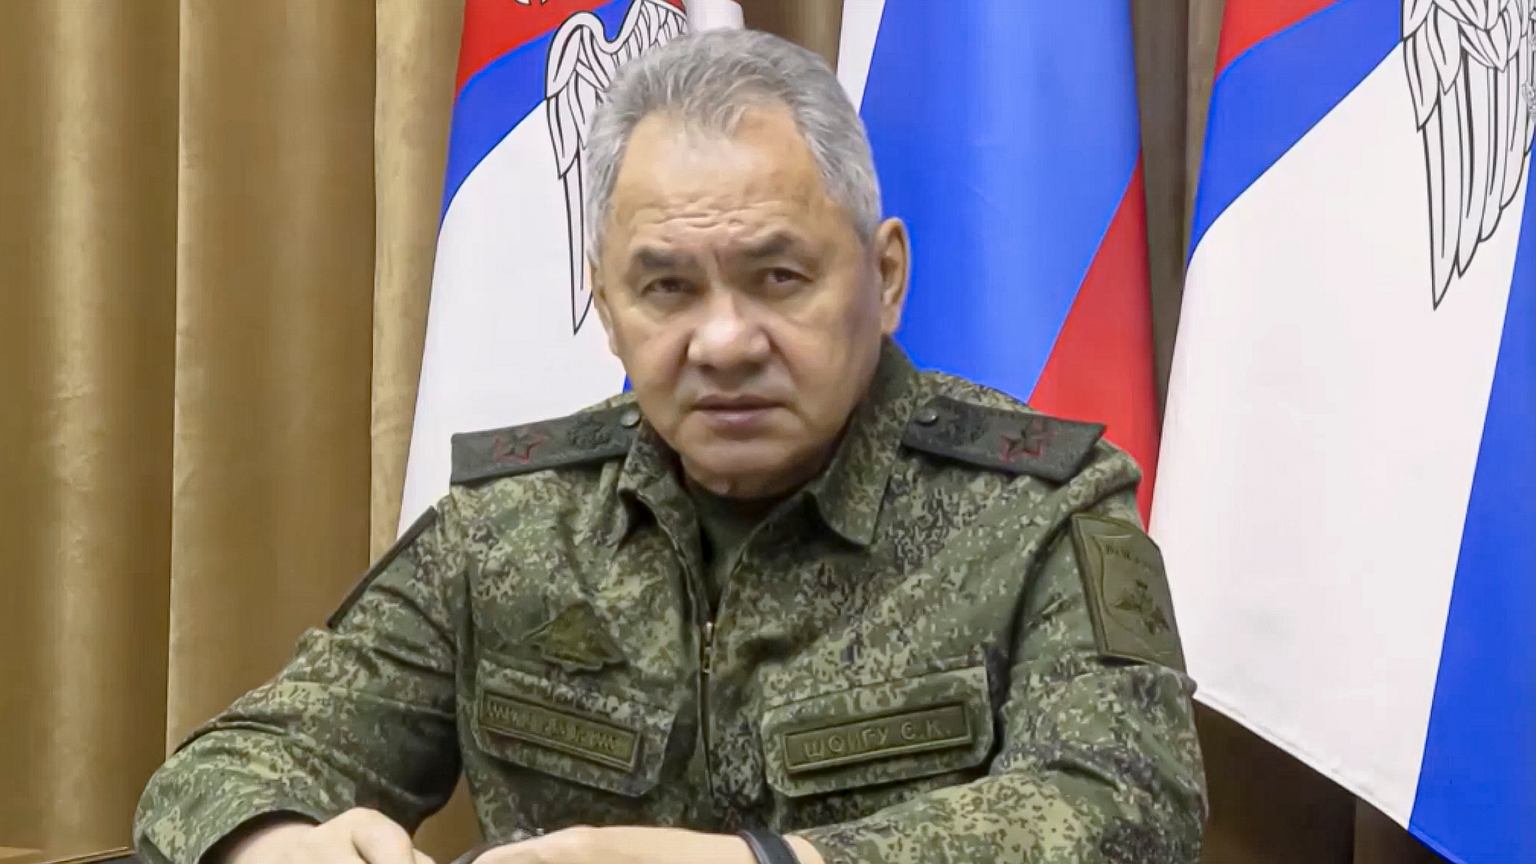 "War under the rug" at the head of the Russian power.  Shoigu's days are numbered.  Be a scapegoat